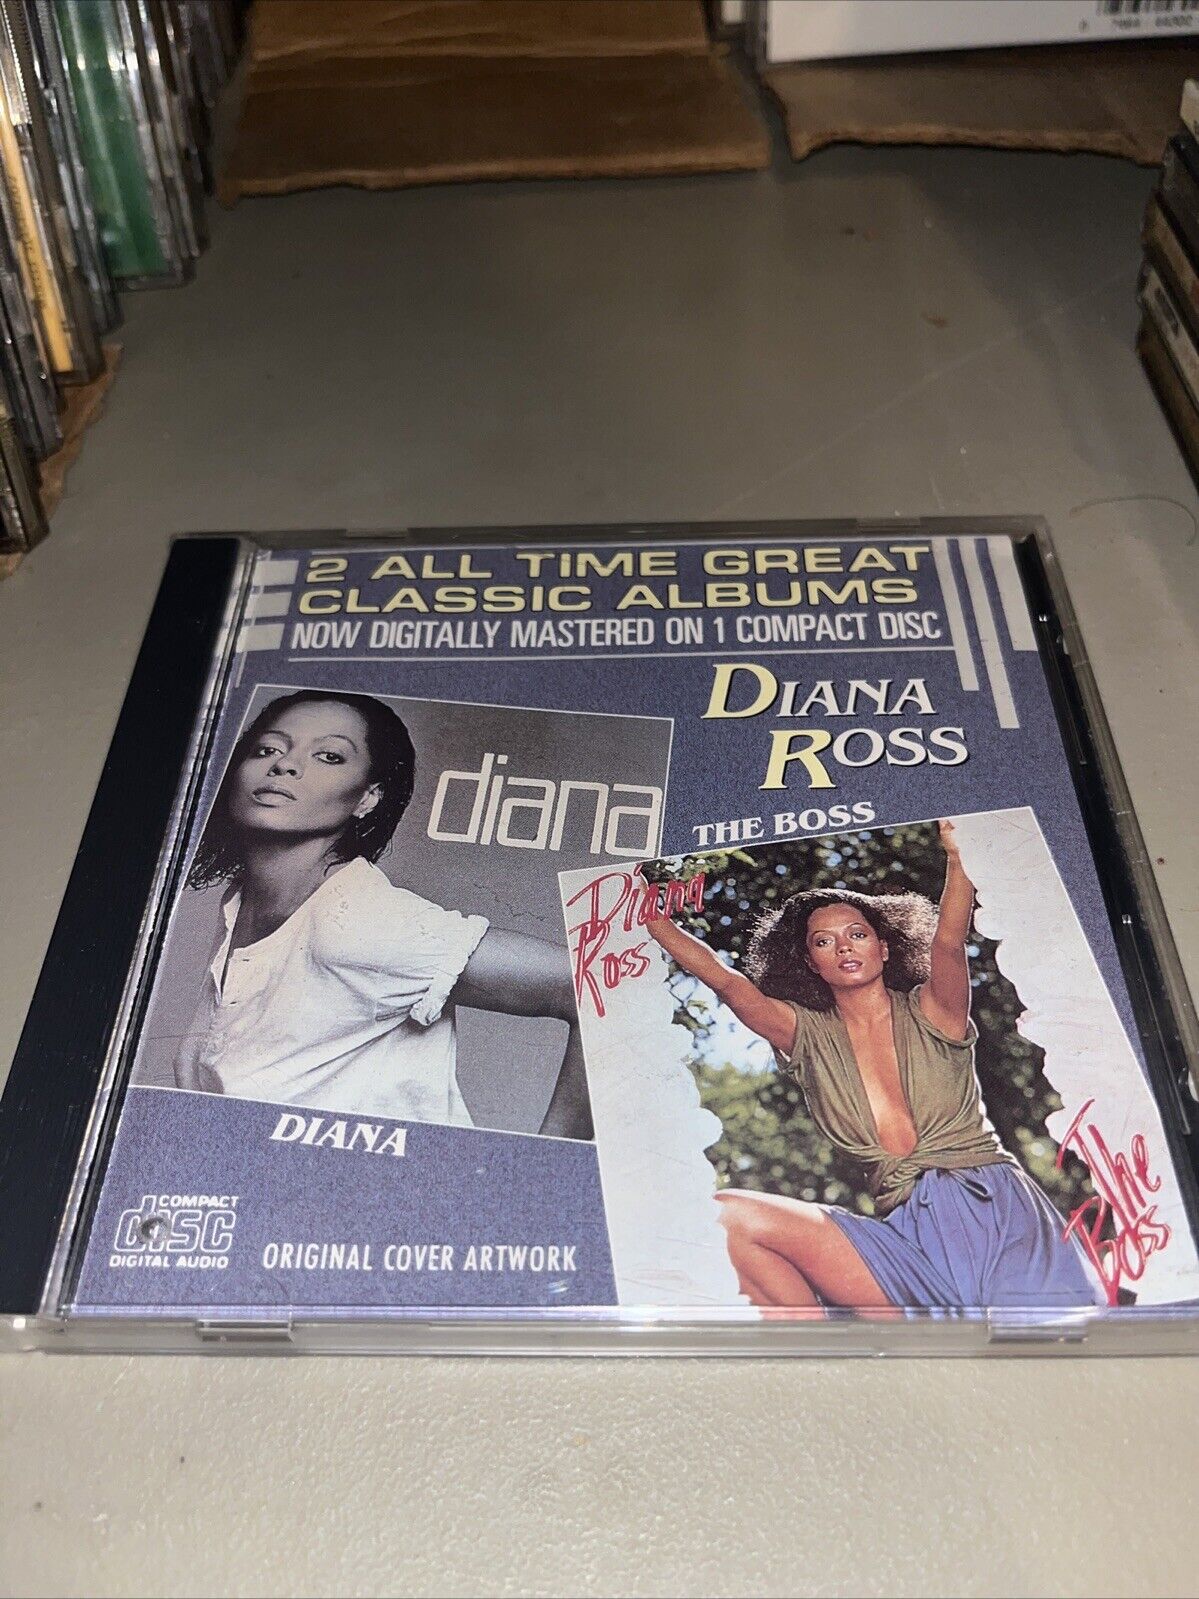 Diana Ross : Diana/Boss -  2 All Time Classic Albums - Audio CD